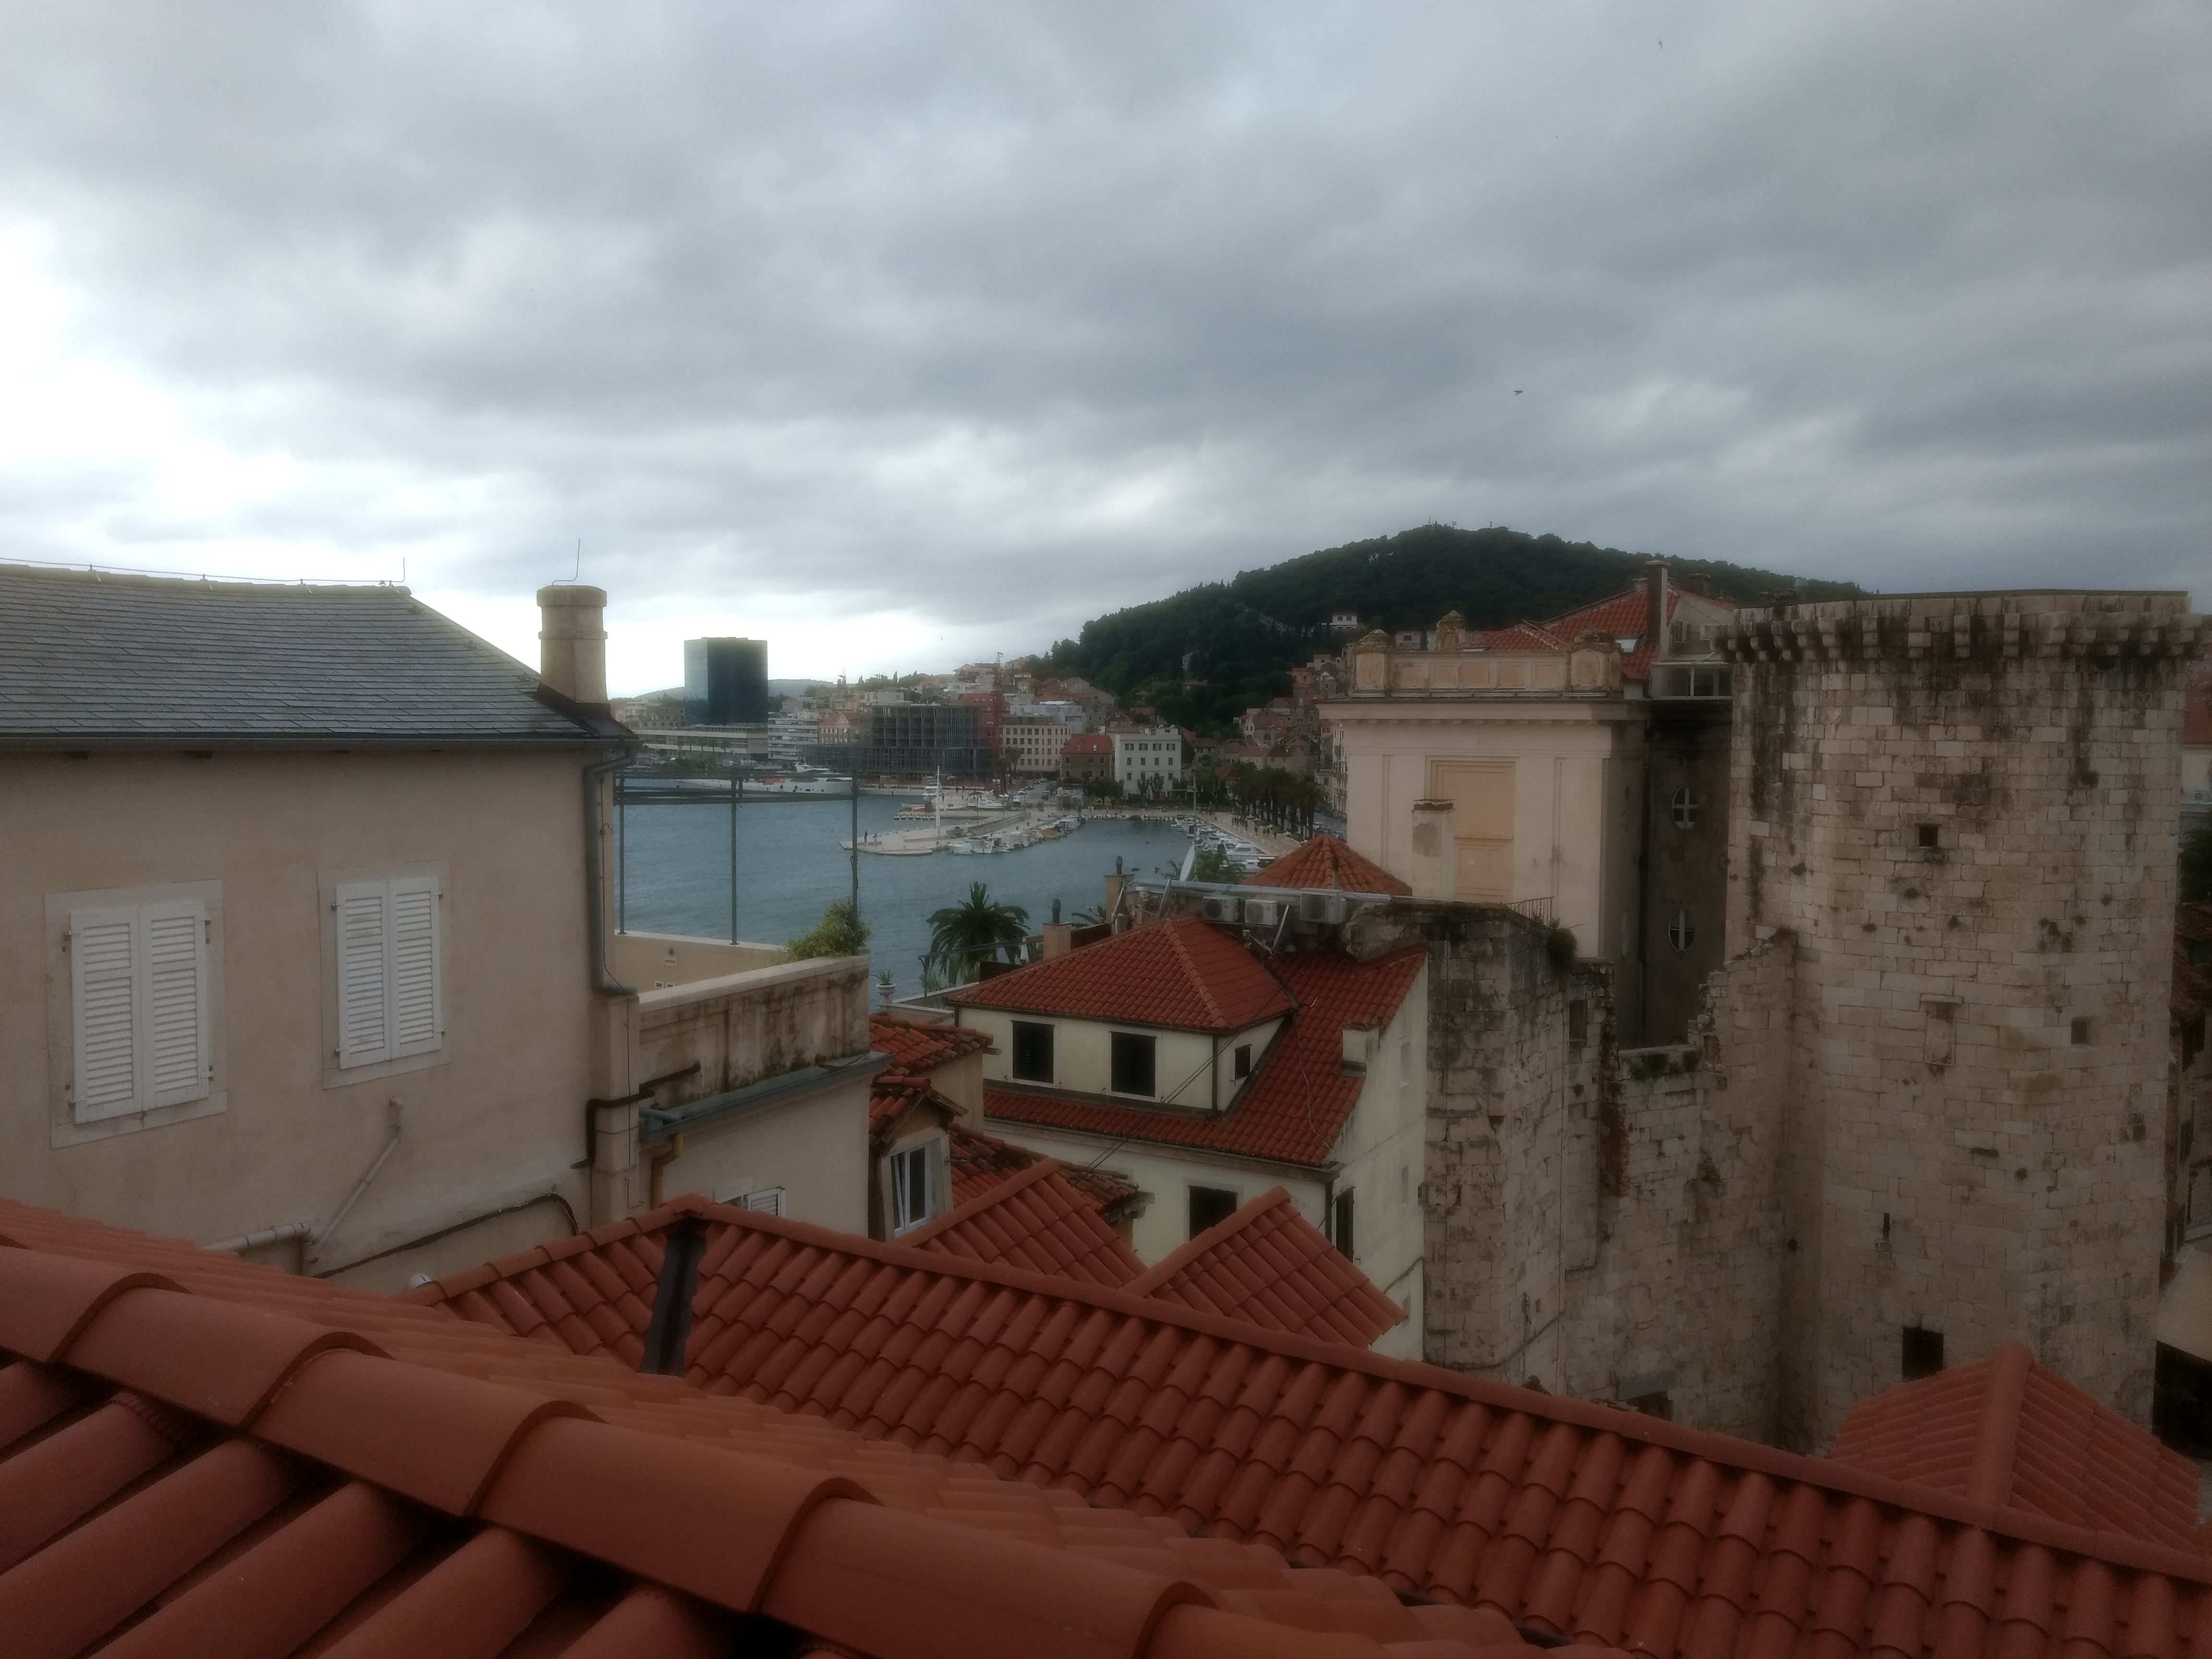 The views from hotel Plaza Marchi rooftop, Split, Croatia